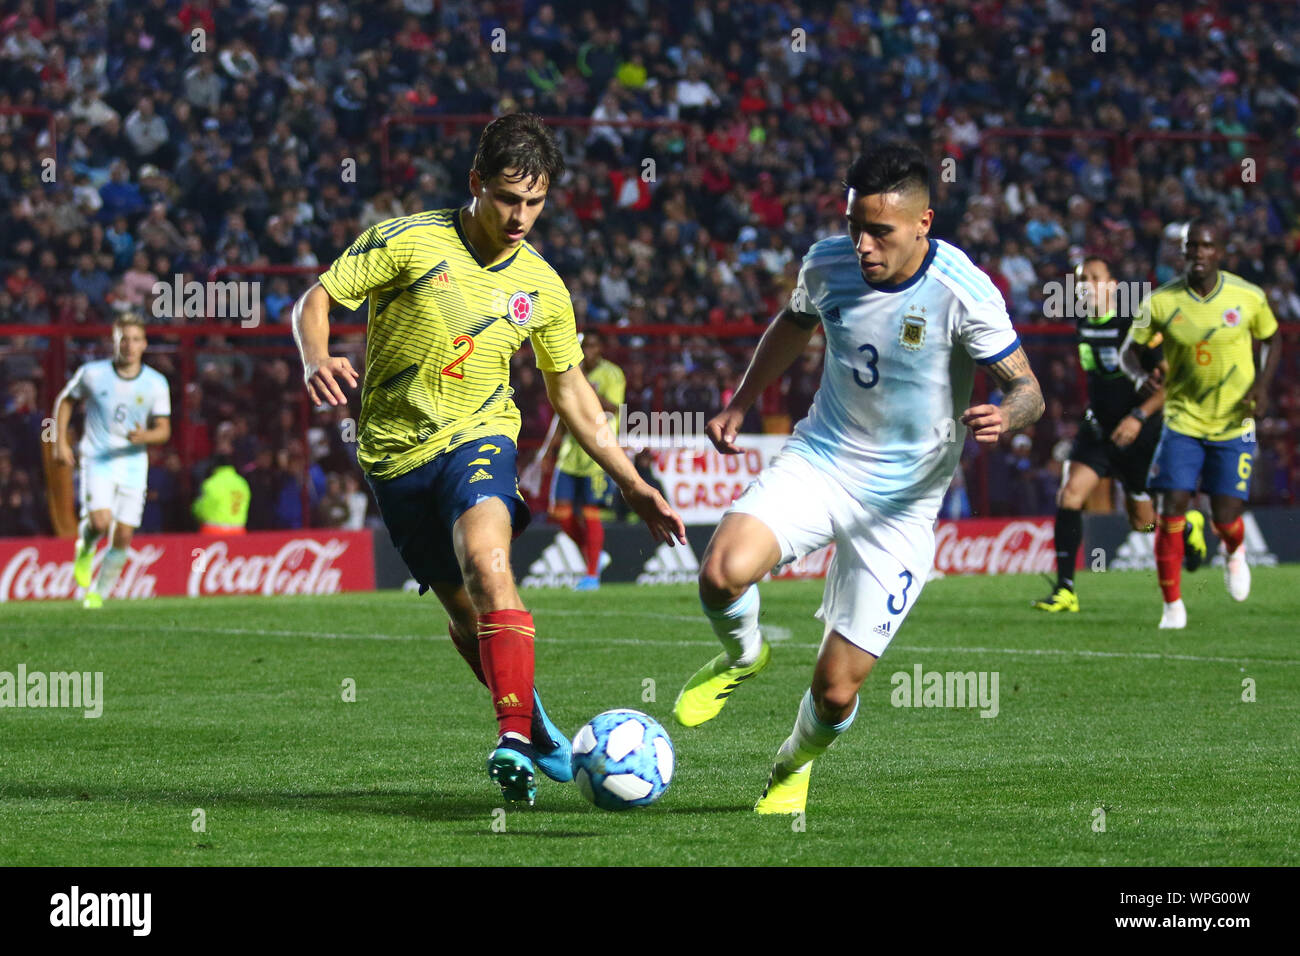 BUENOS AIRES, 08.09.2019: Francisco Ortega during the match between Argentina and Colombia for friendly match on Diego Maradona Stadium in Buenos Aire Stock Photo